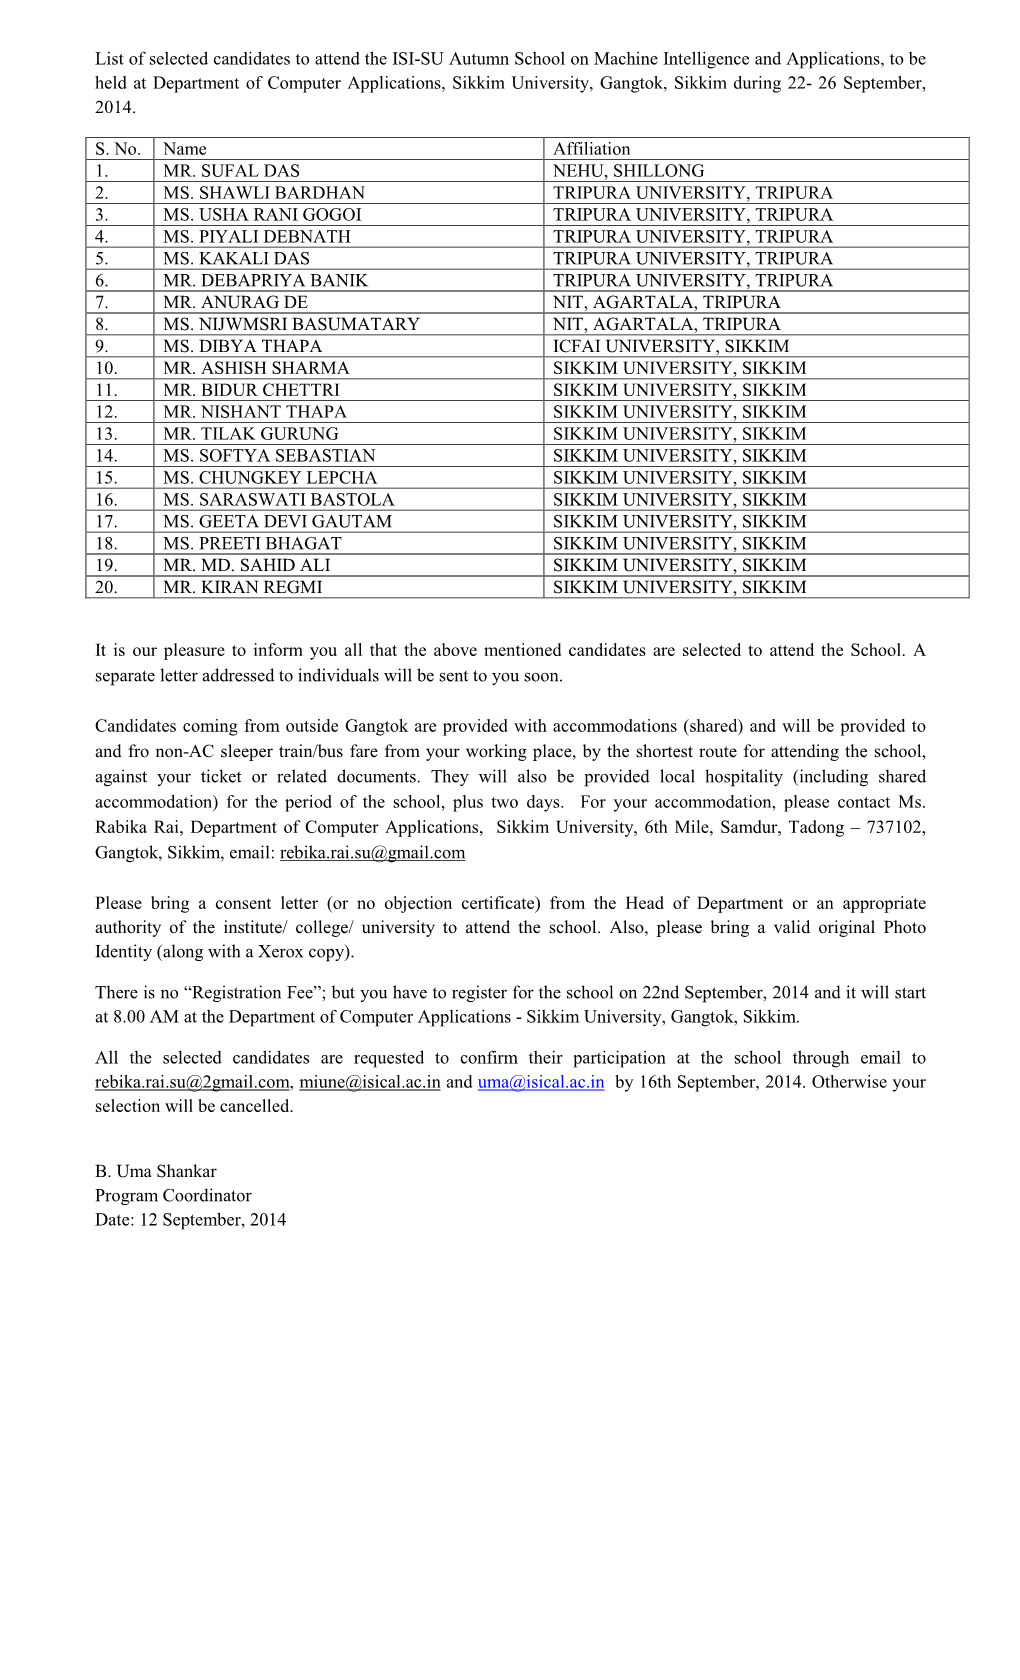 List of Selected Candidates to Attend the ISI-SU Autumn School On